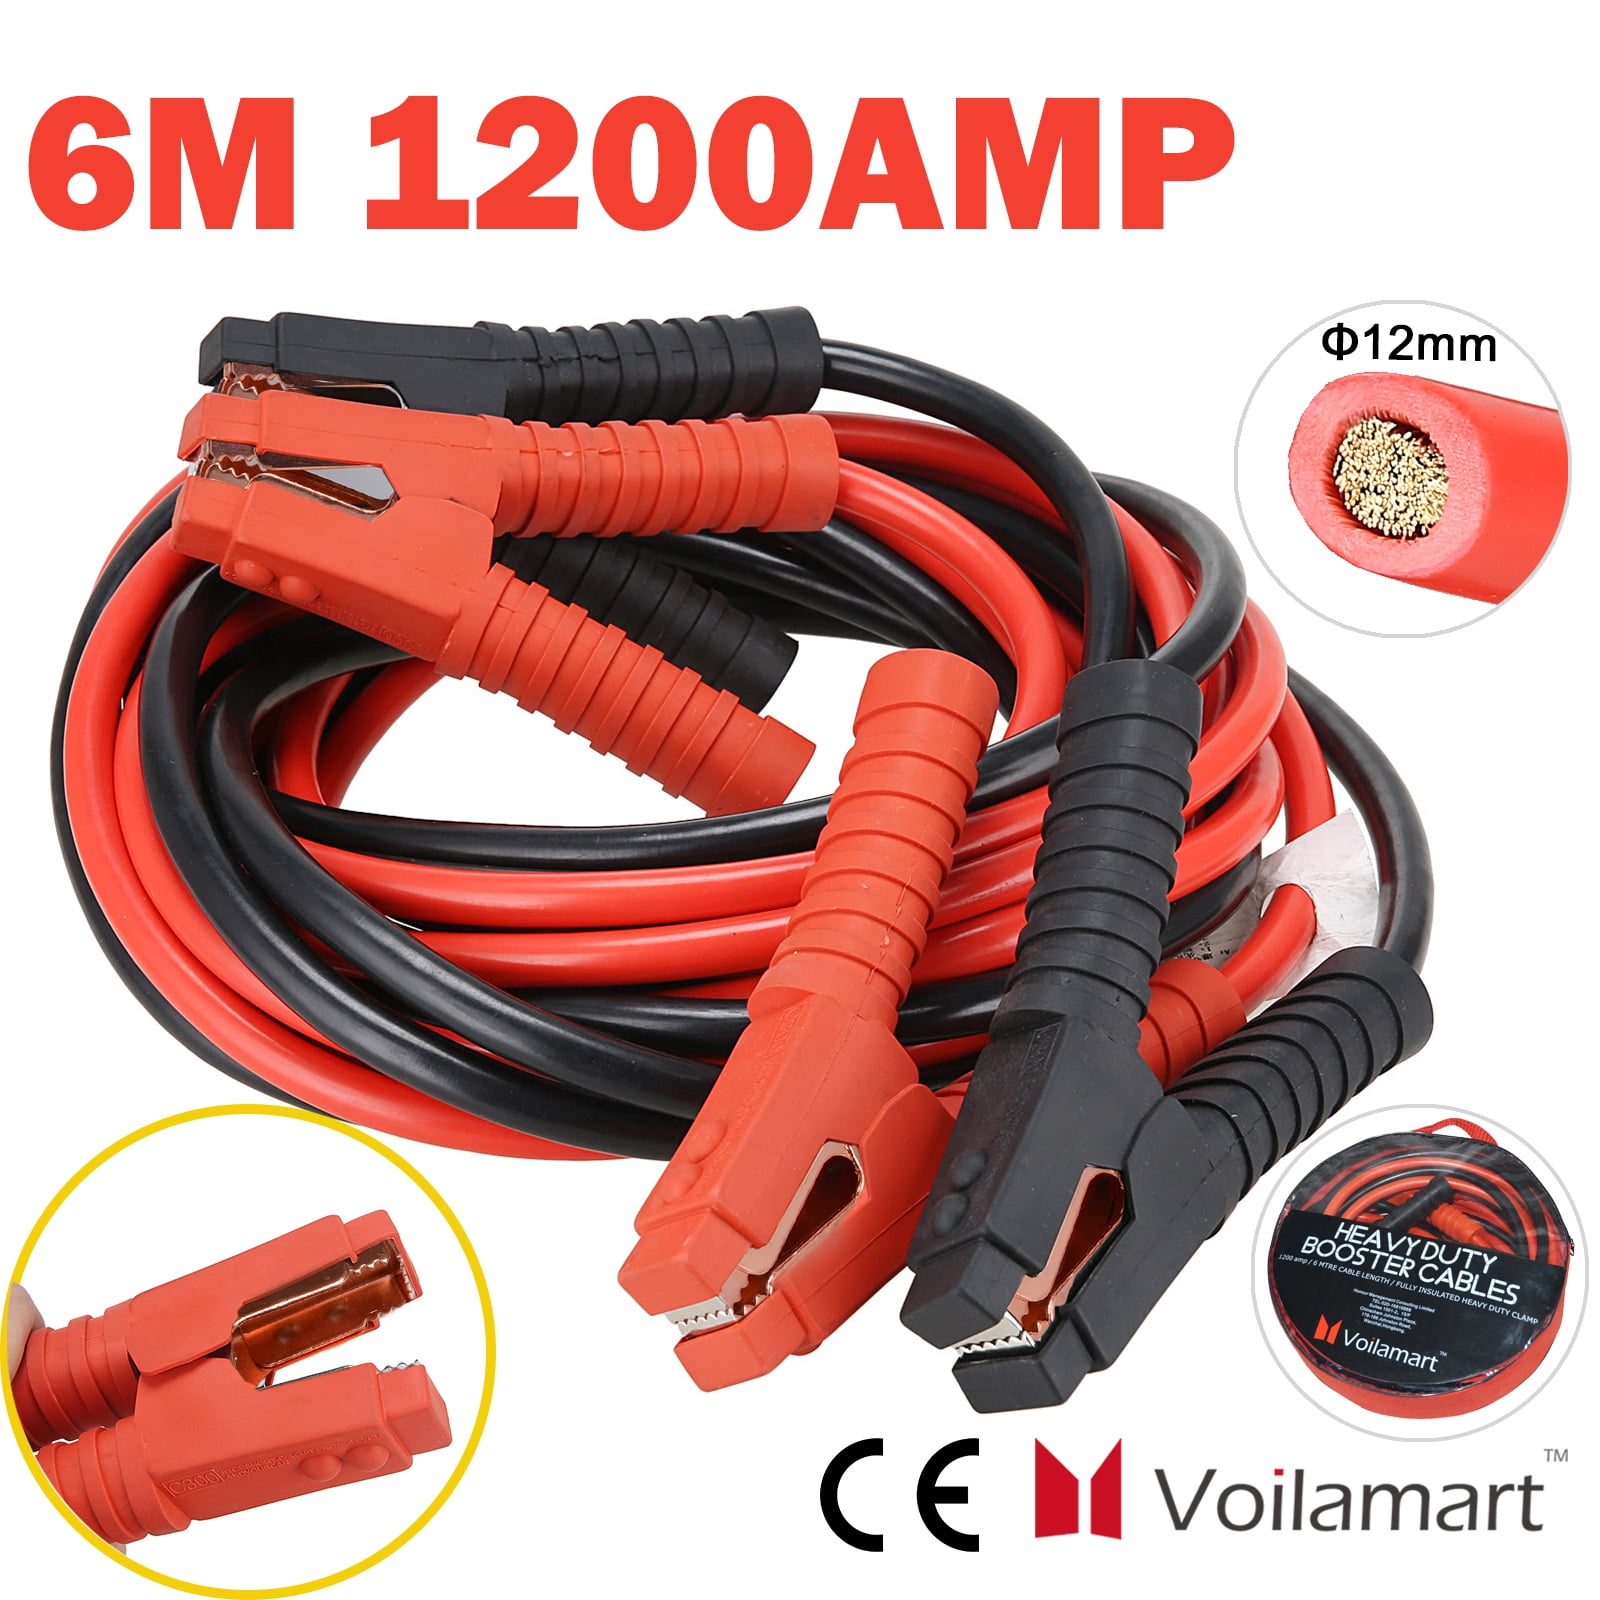 High Peak Jumper Cables Kit for Car Booster Cables with UL-Listed Clamps SUV and Trucks with up to 7-Liter Gasoline and 5-Liter Diesel Engines THIKPO G225 Heavy Duty Jumper Cables 